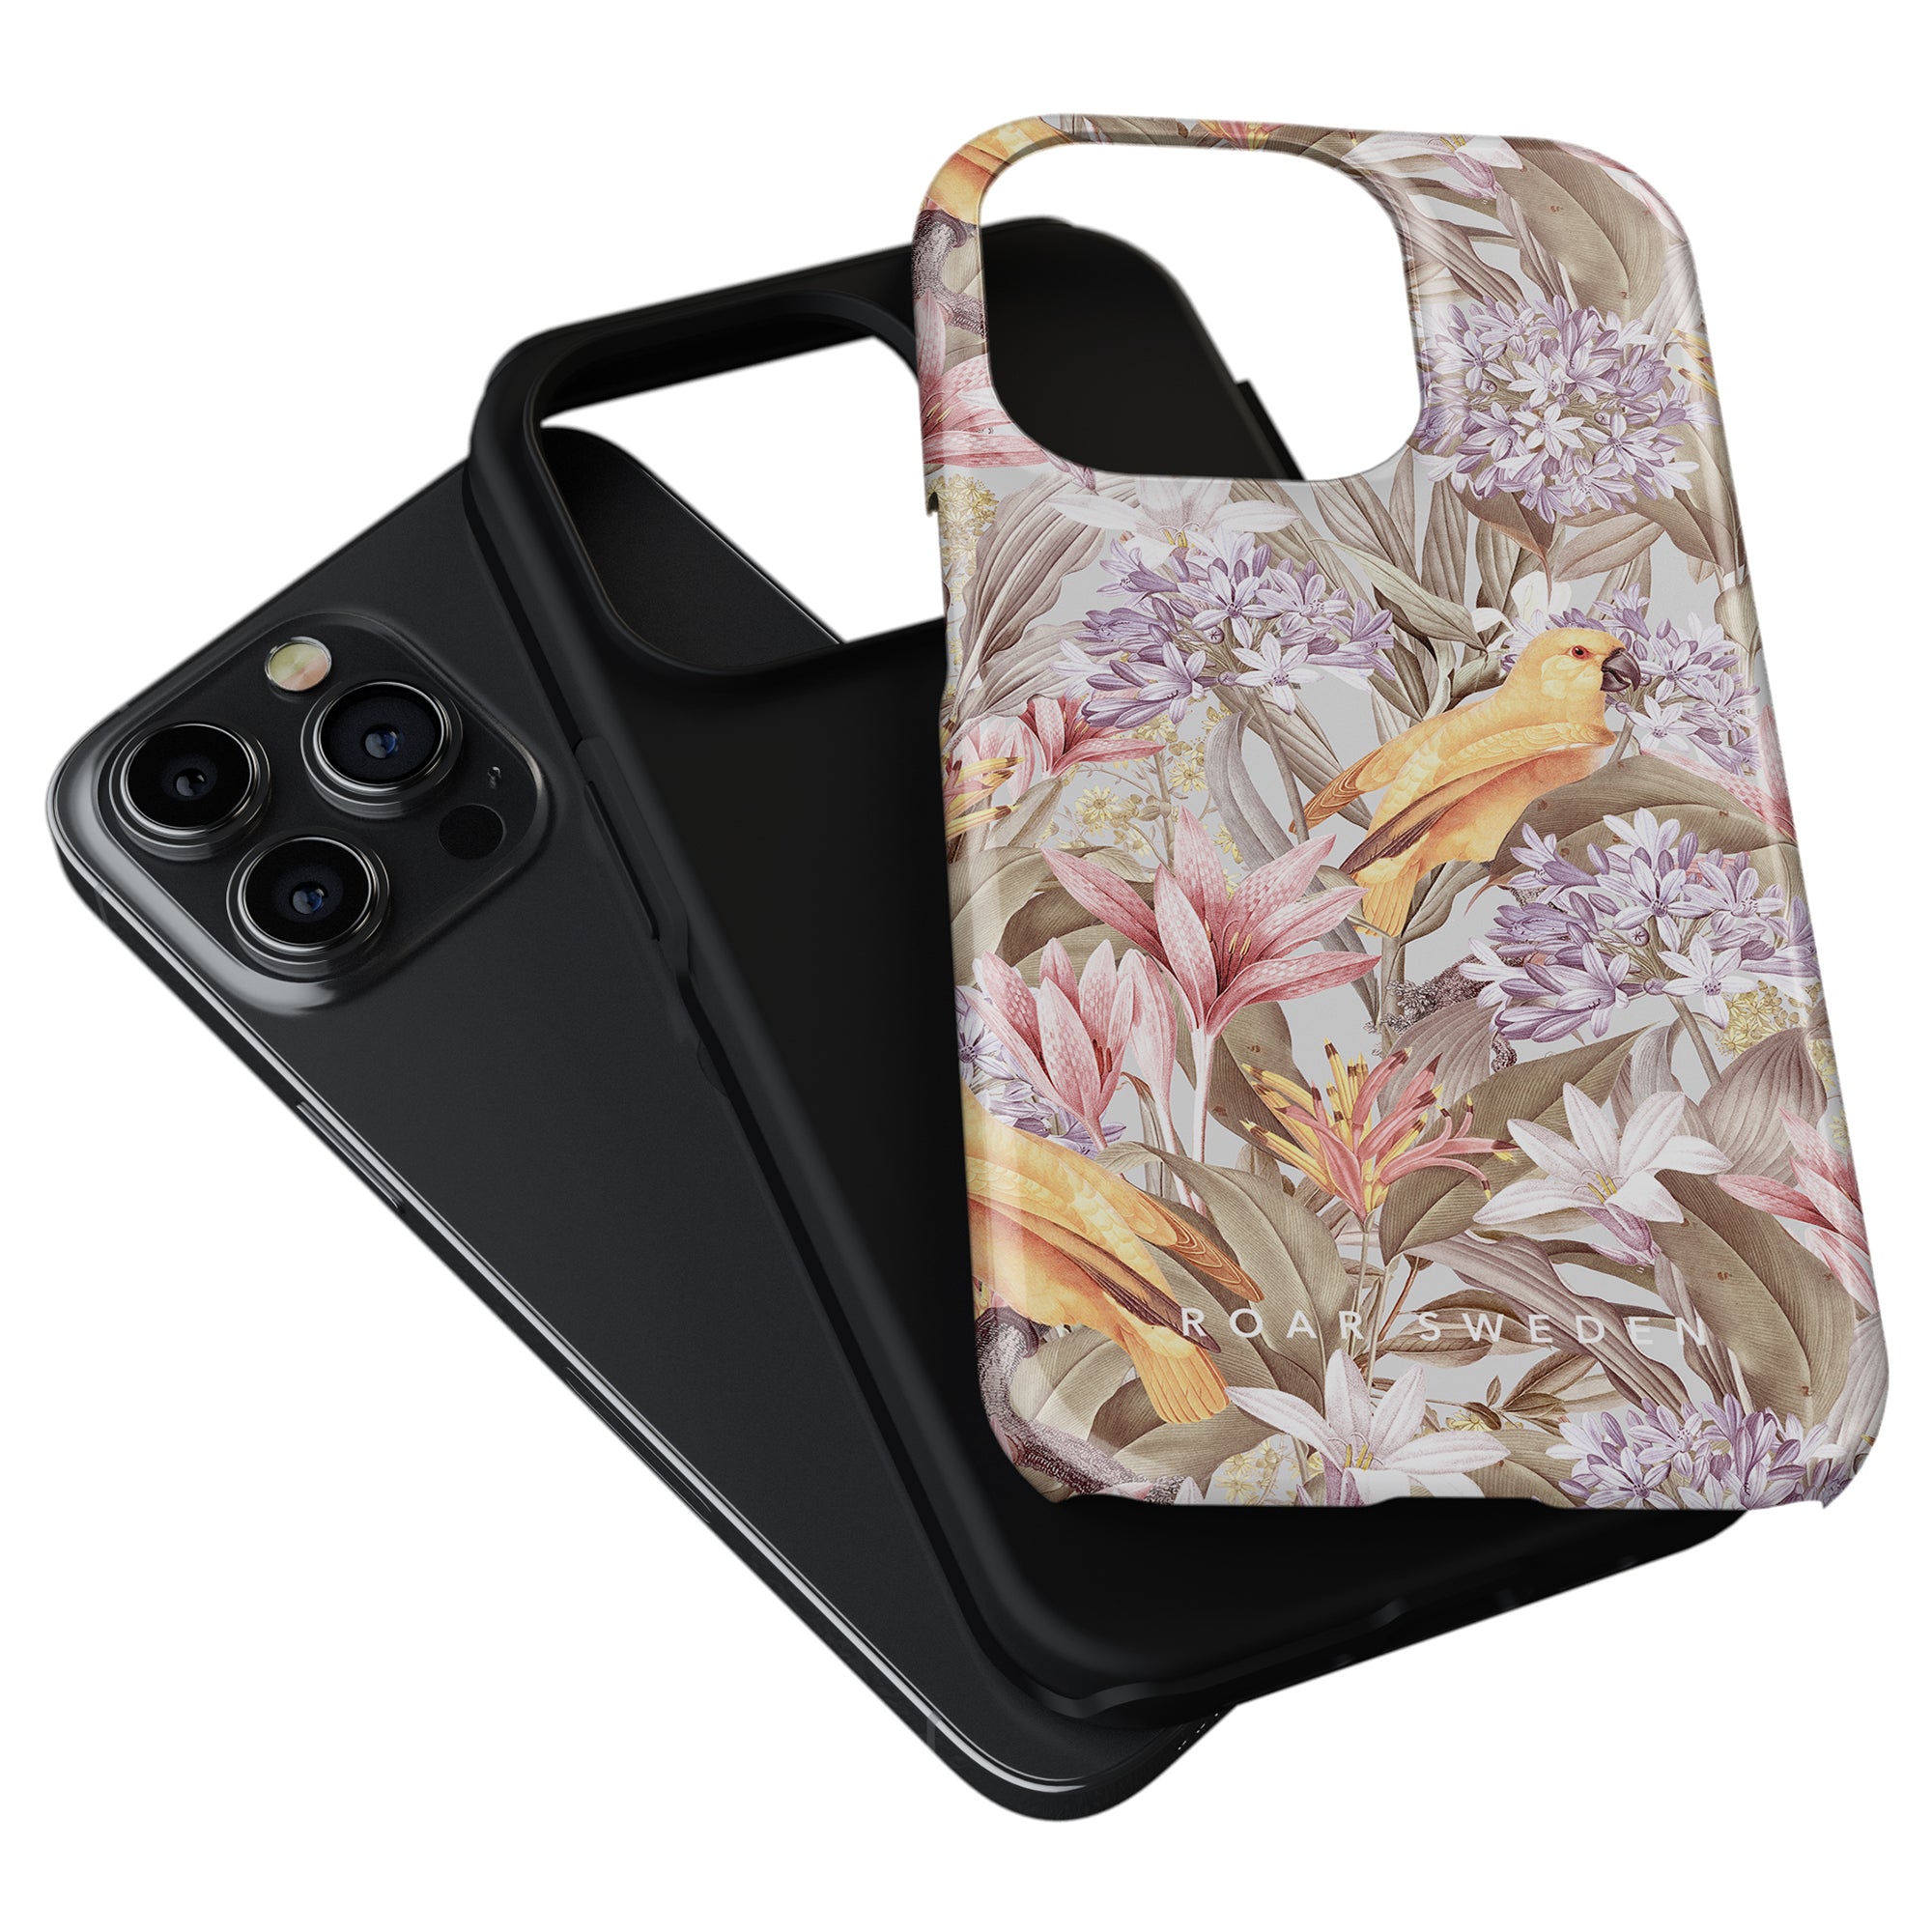 Two smartphone cases, one black and the Mango Parrot - Tough Case from the sommar collection with a floral and bird design, positioned against a white background.